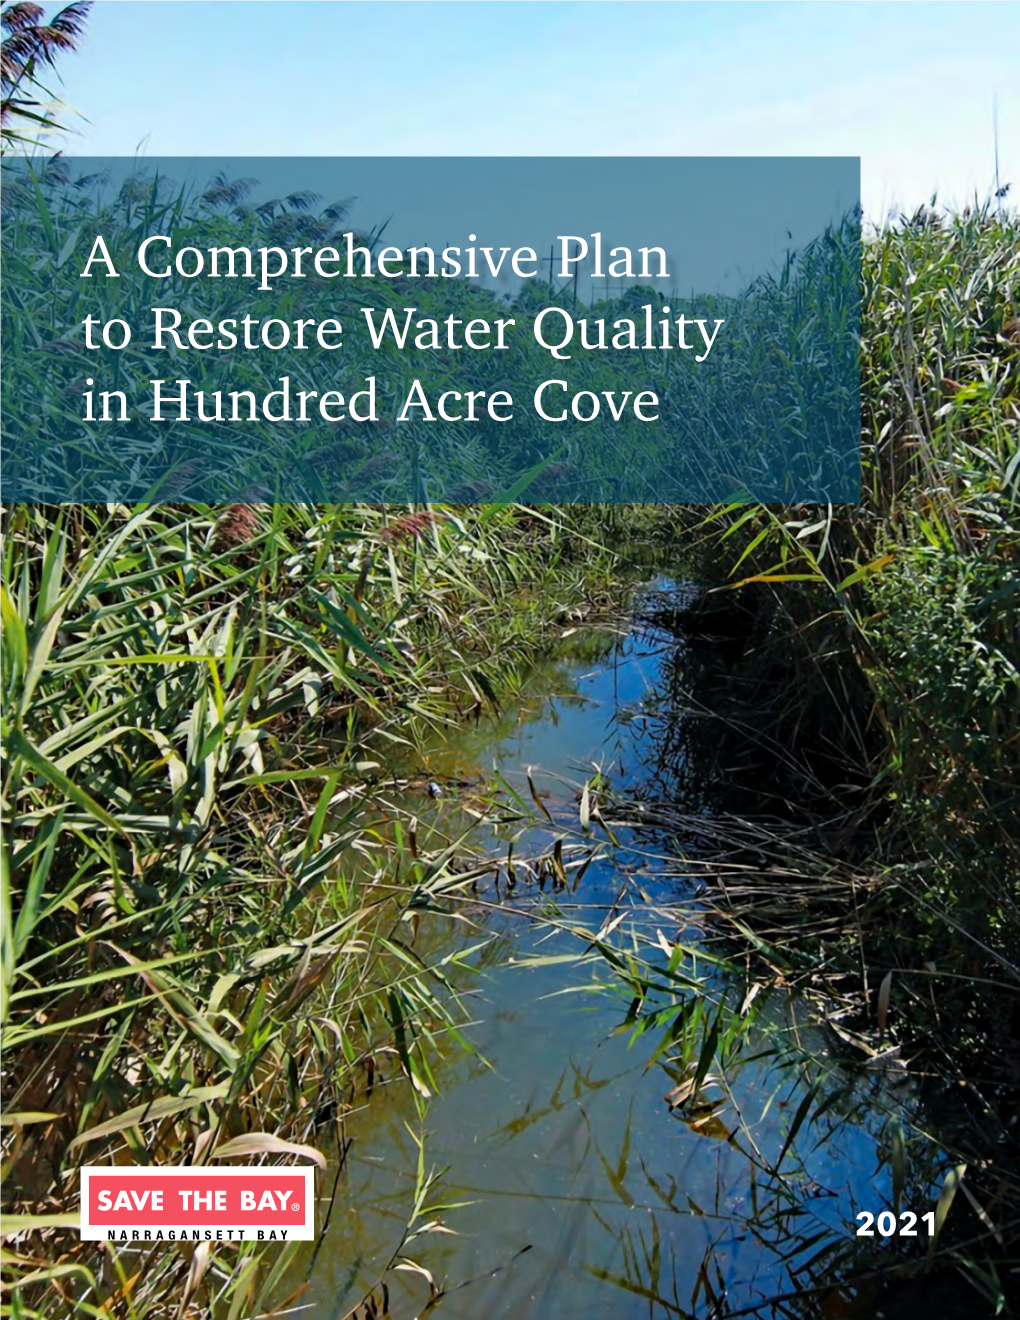 A Comprehensive Plan to Restore Water Quality in Hundred Acre Cove